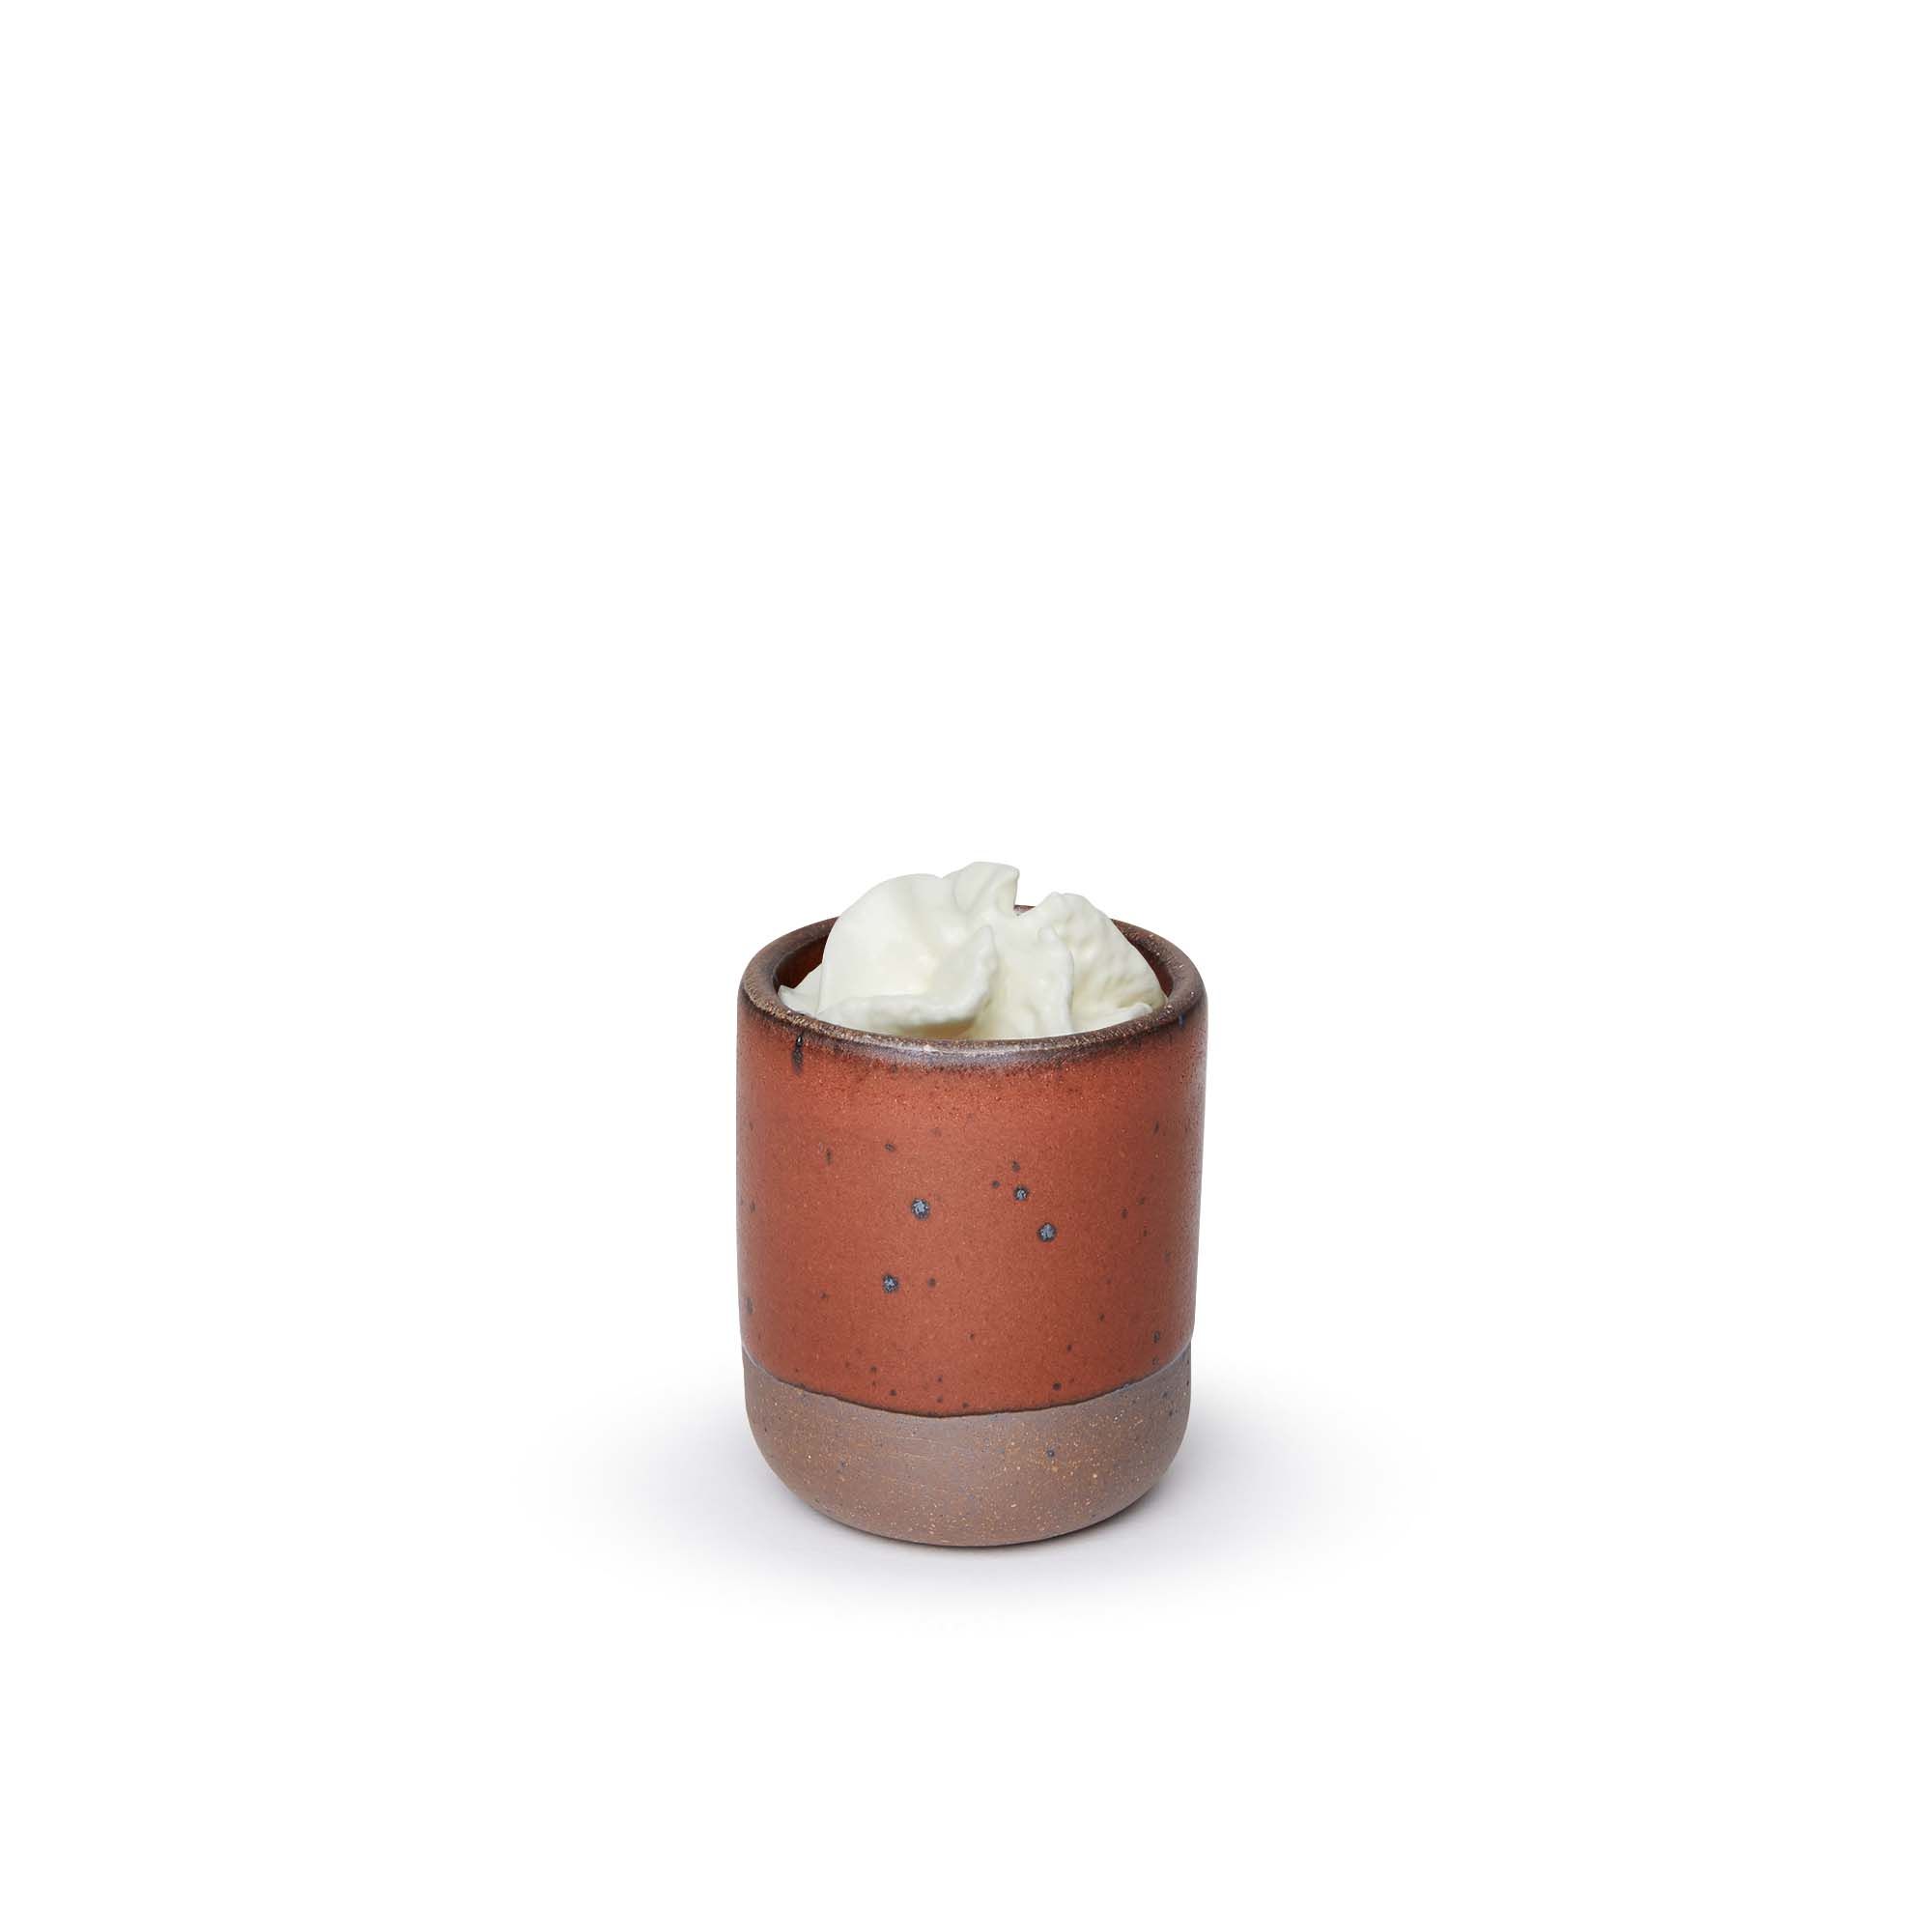 A small, short ceramic mug cup in a cool burnt terracotta color featuring iron speckles and unglazed rim and bottom base, topped with whipped cream.